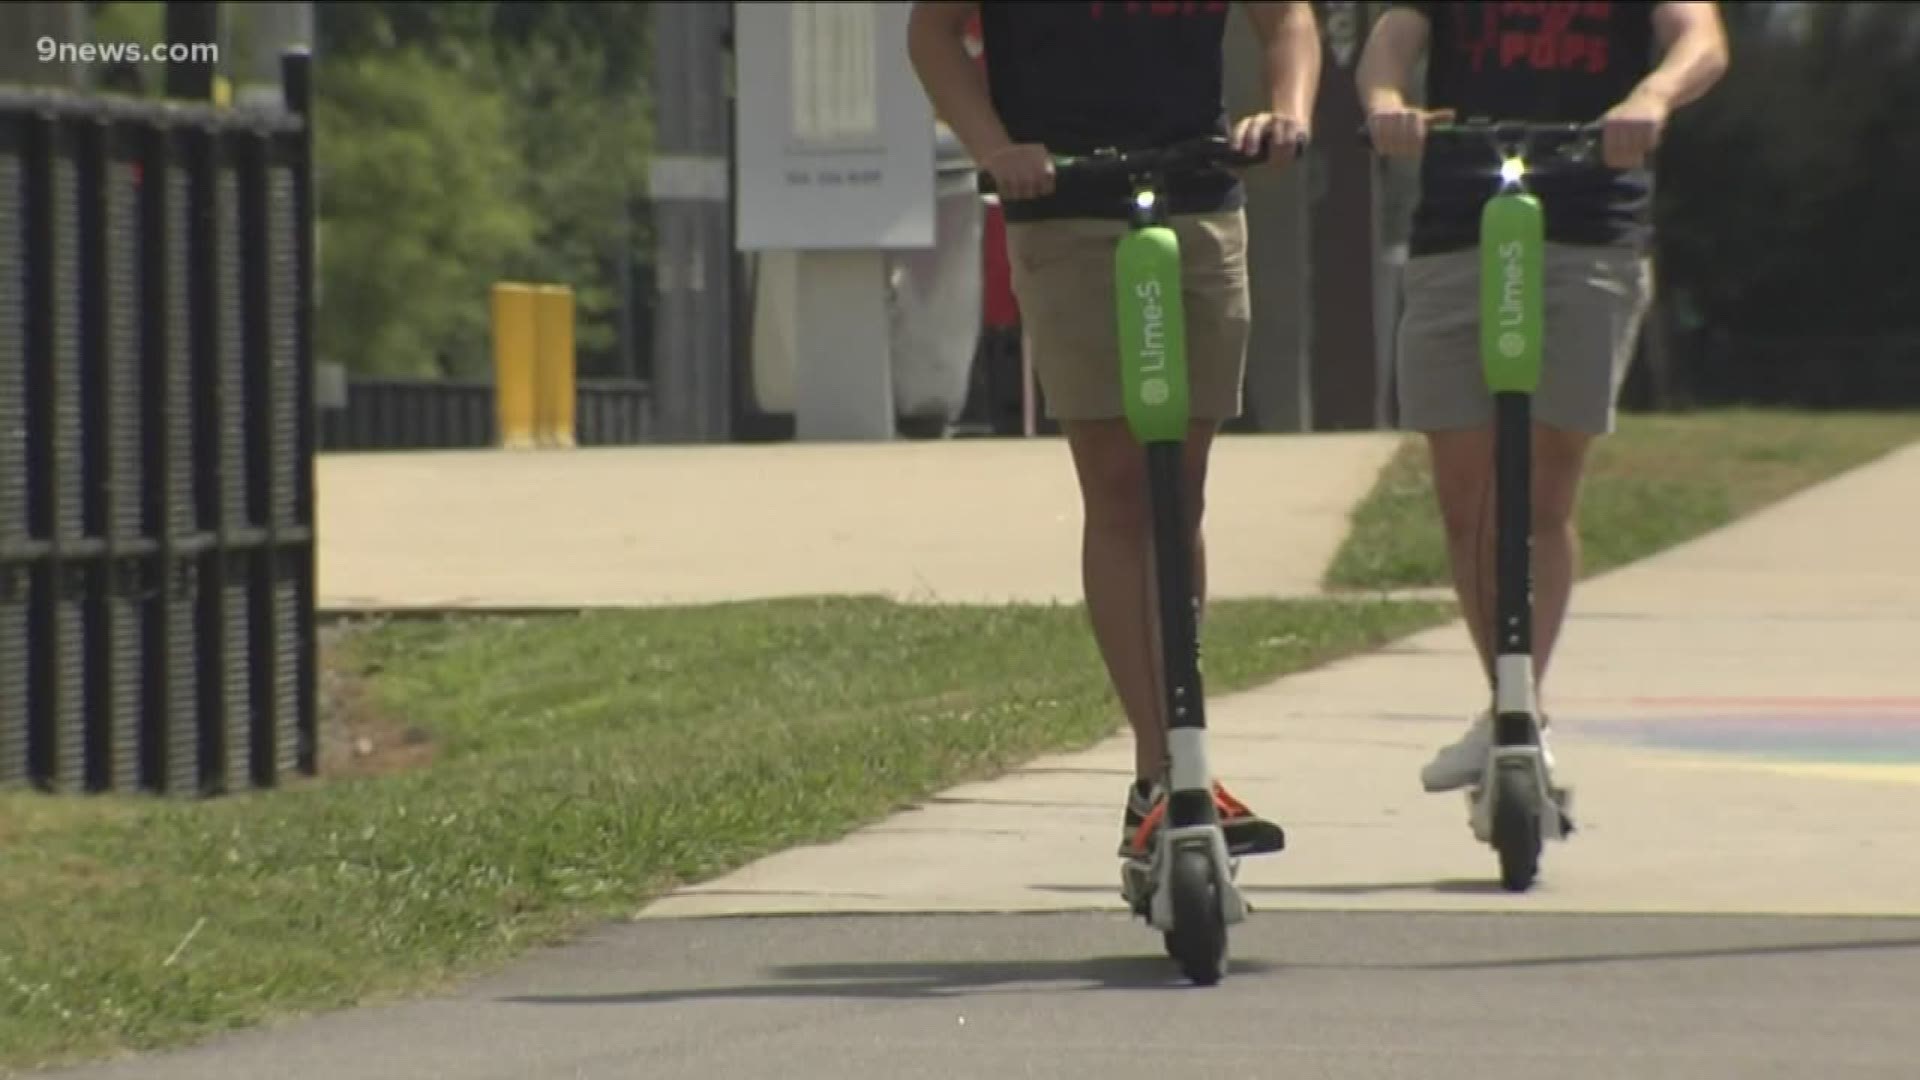 Ever since scooters took over downtown Denver, several different issues have arisen. But, do you know what to do in the case of a "scooter hit-and-run?"